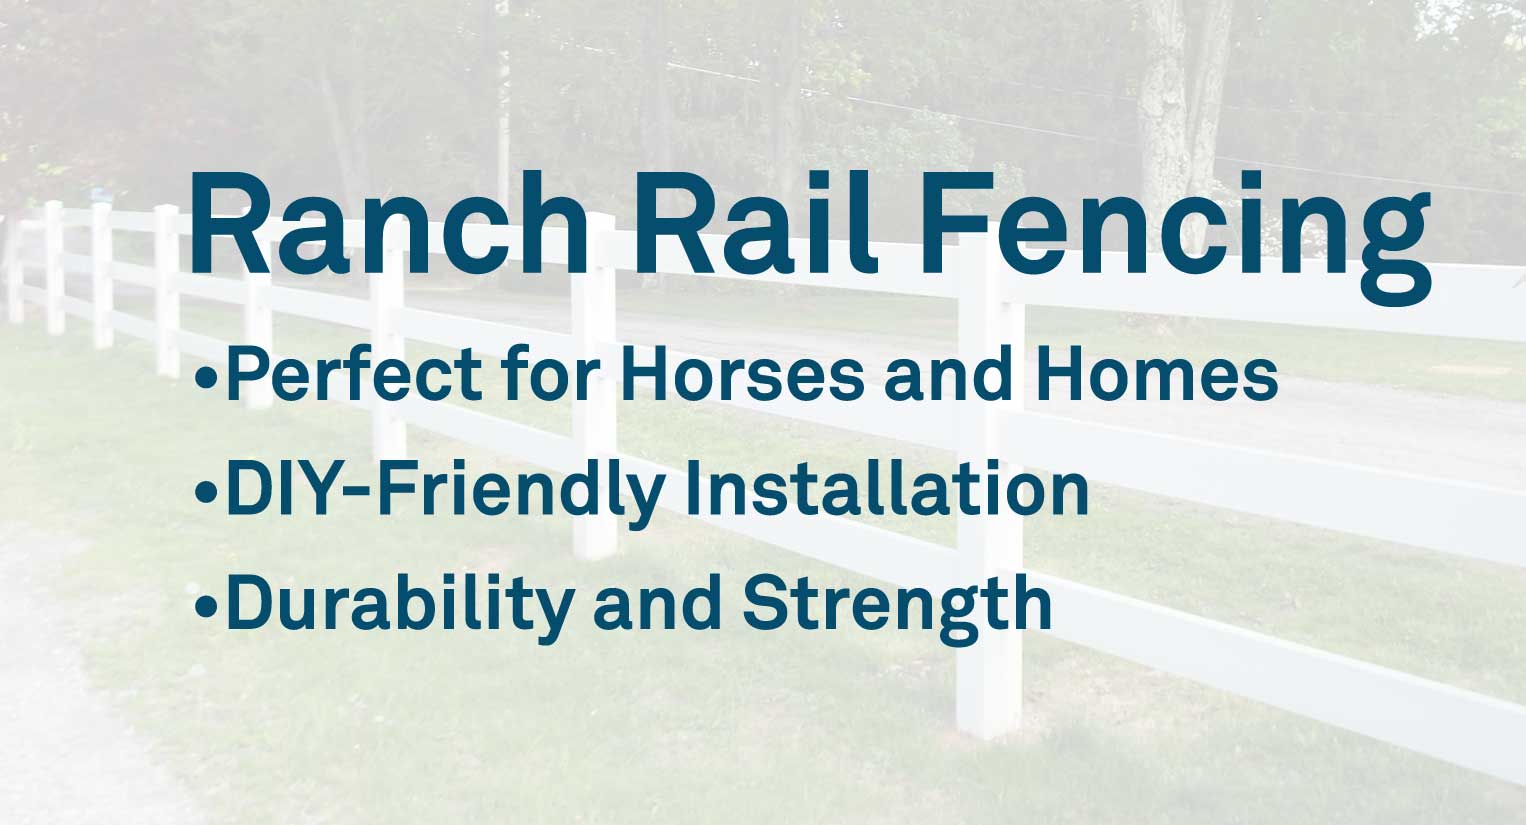 Ranch Rail Fencing - Perfect for Horses and Homes - DIY-Friendly Installation - Durability and Strength